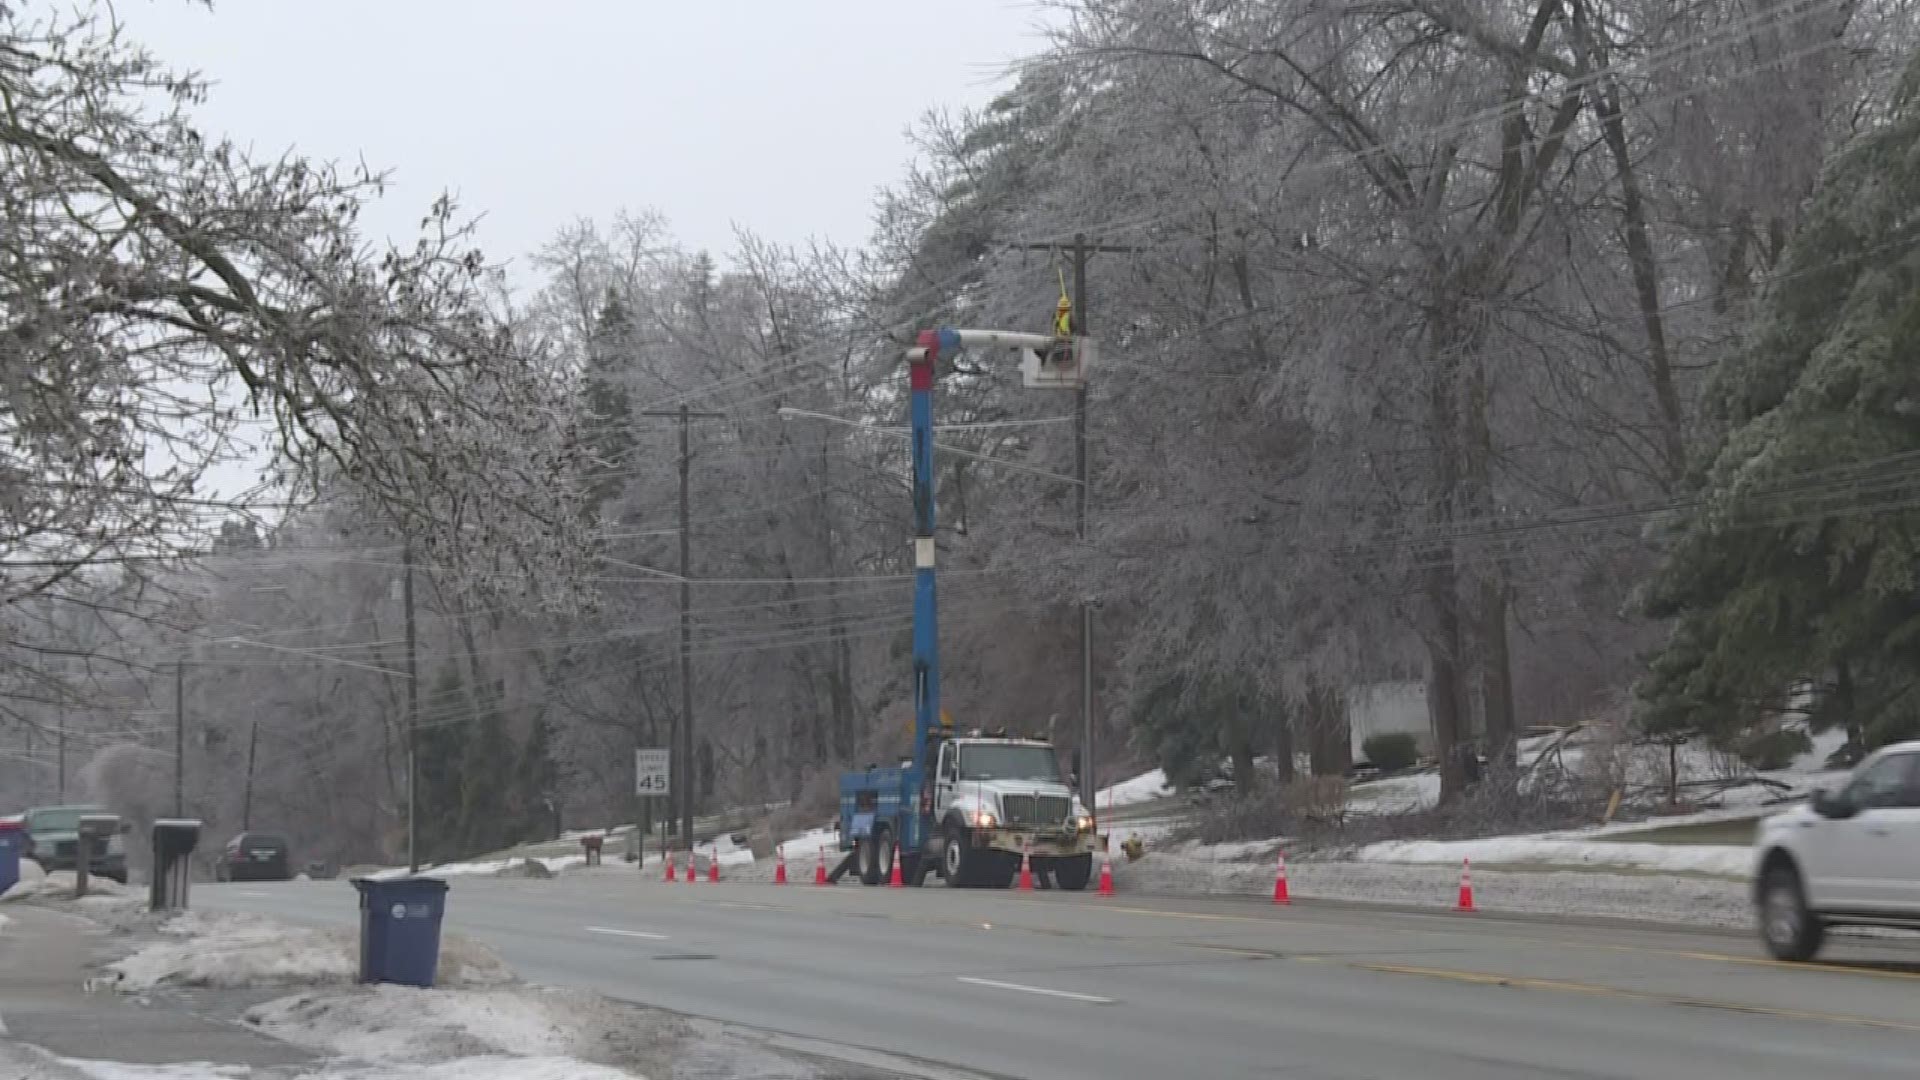 Utility crews from across Michigan and other midwestern states are hard at work, repairing power lines and other equipment damaged by this week's severe winter weather